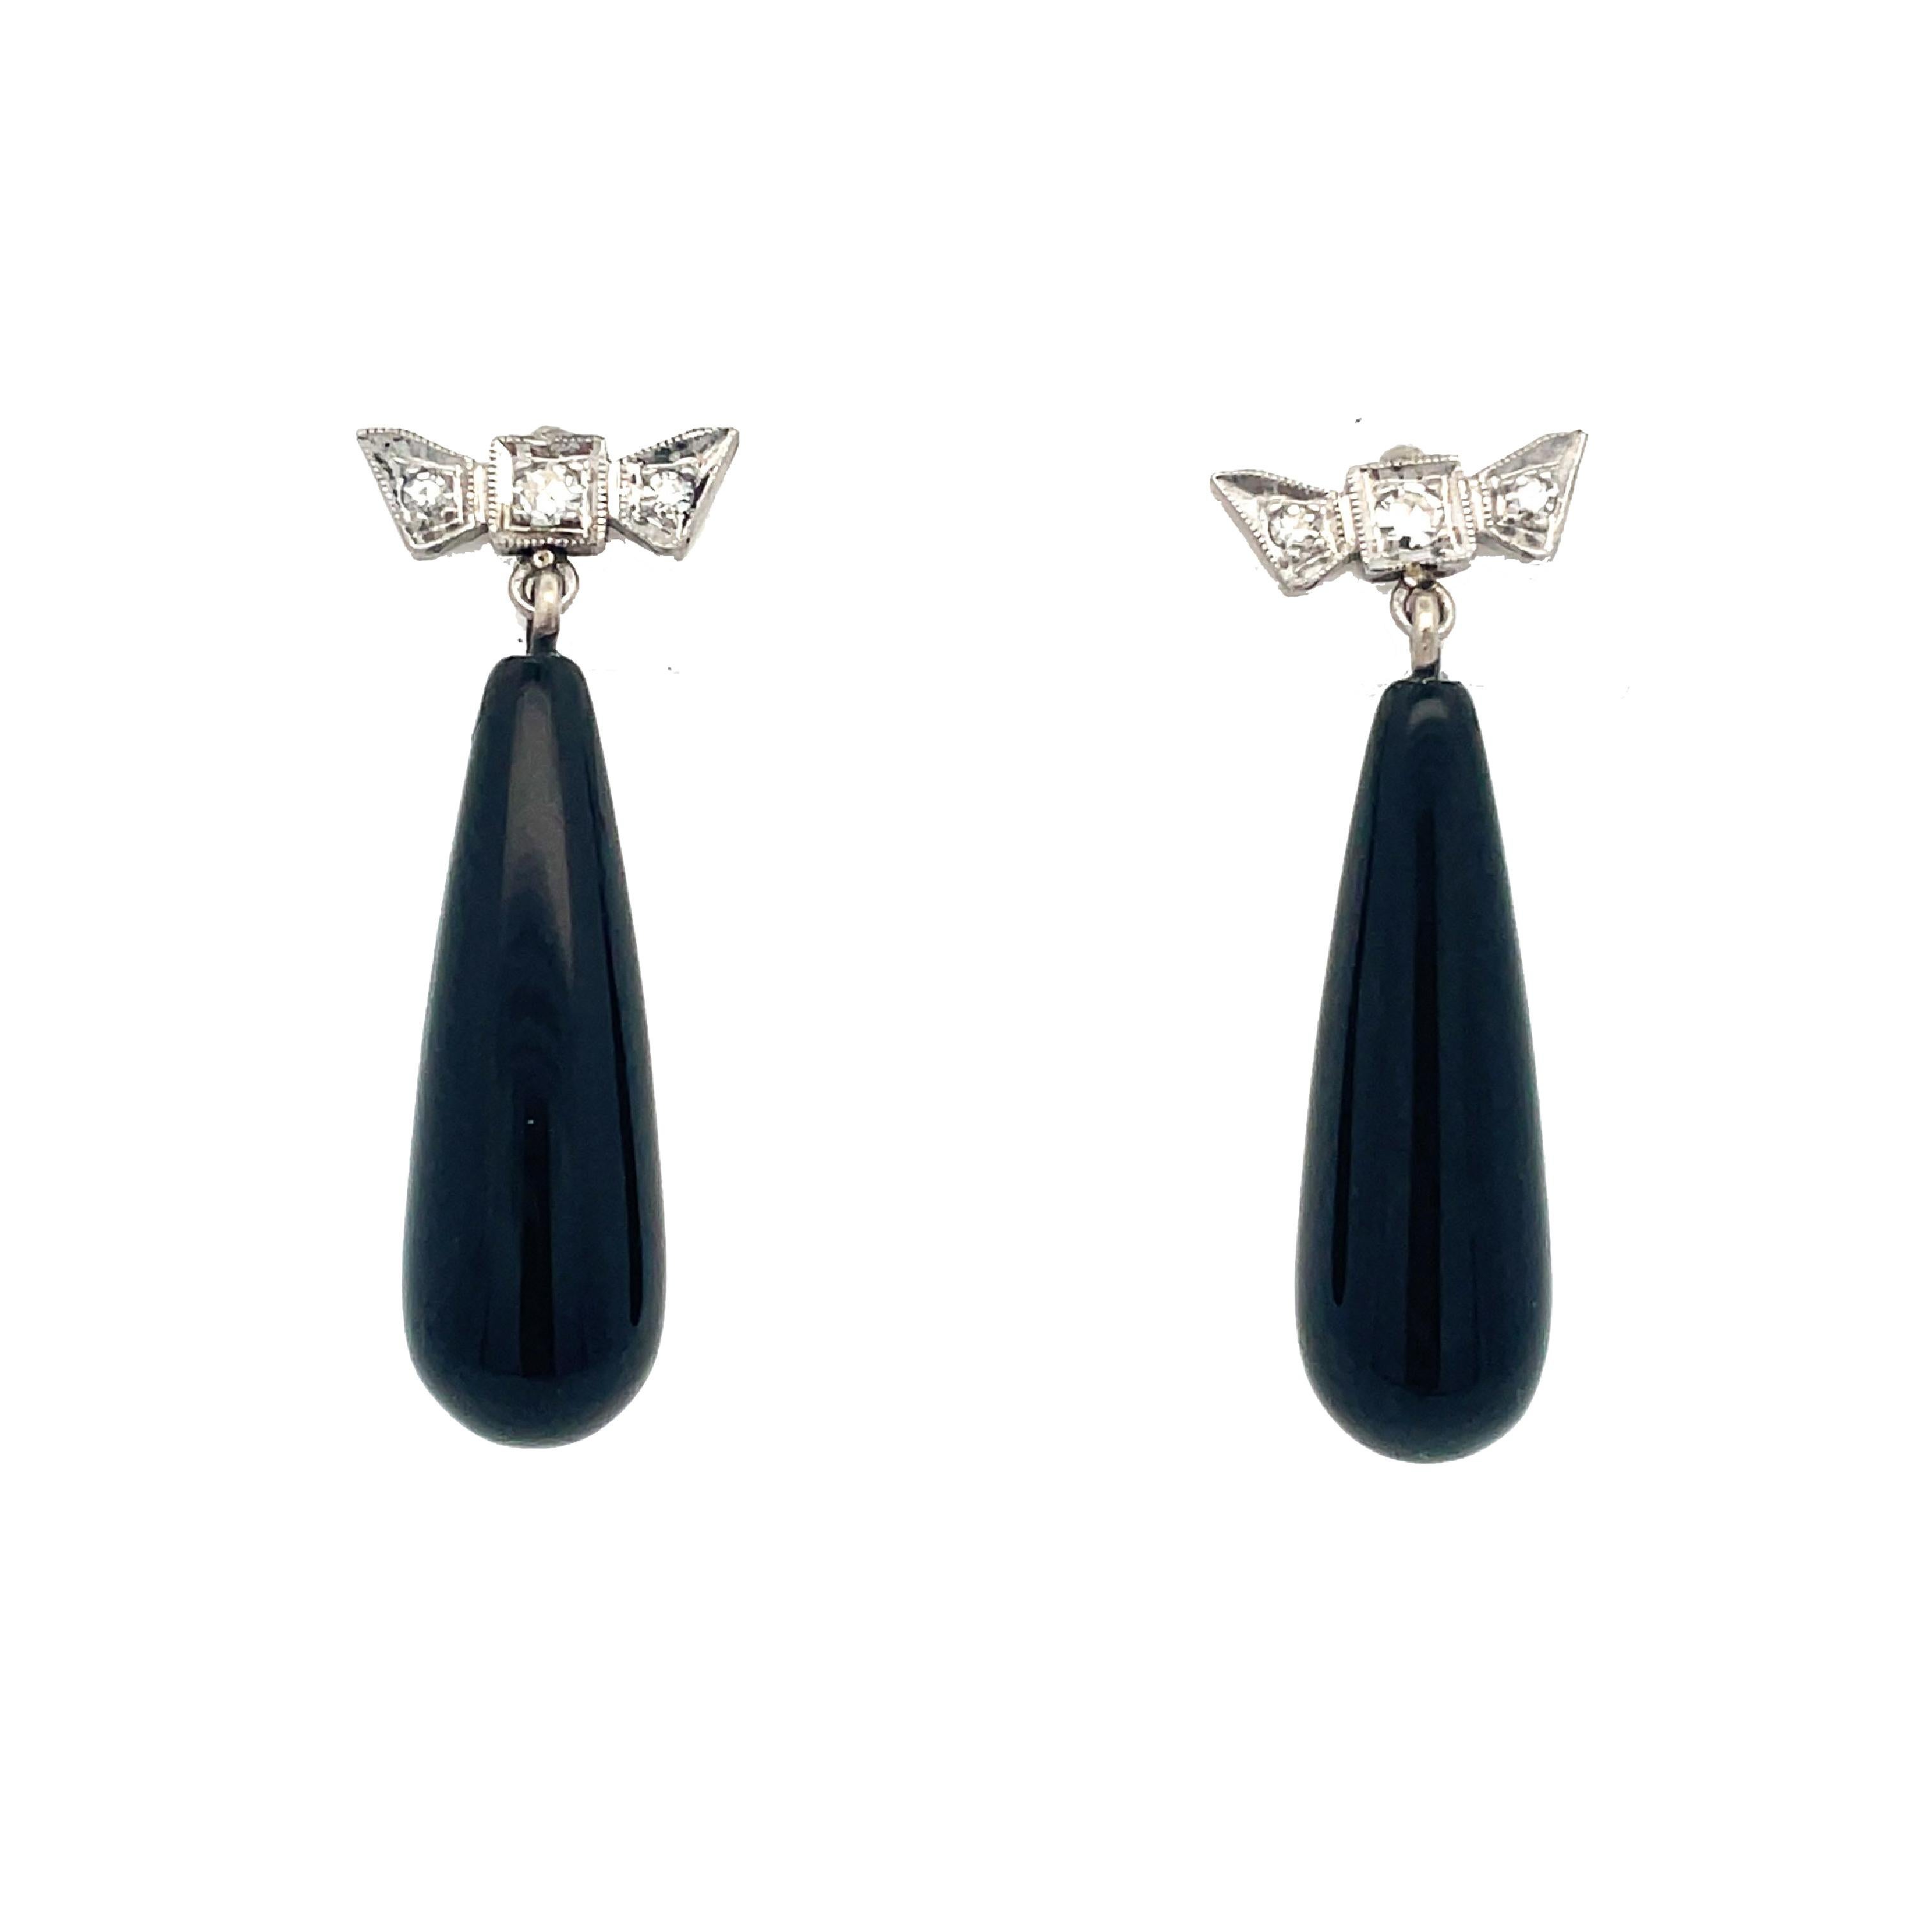 This is a stunning pair of Retro earrings crafted in 14K white gold that showcases beautiful black onyx dangles and sparkling single-cut diamonds! These earrings are elegant, sophisticated, and fully articulated! The earrings would look striking